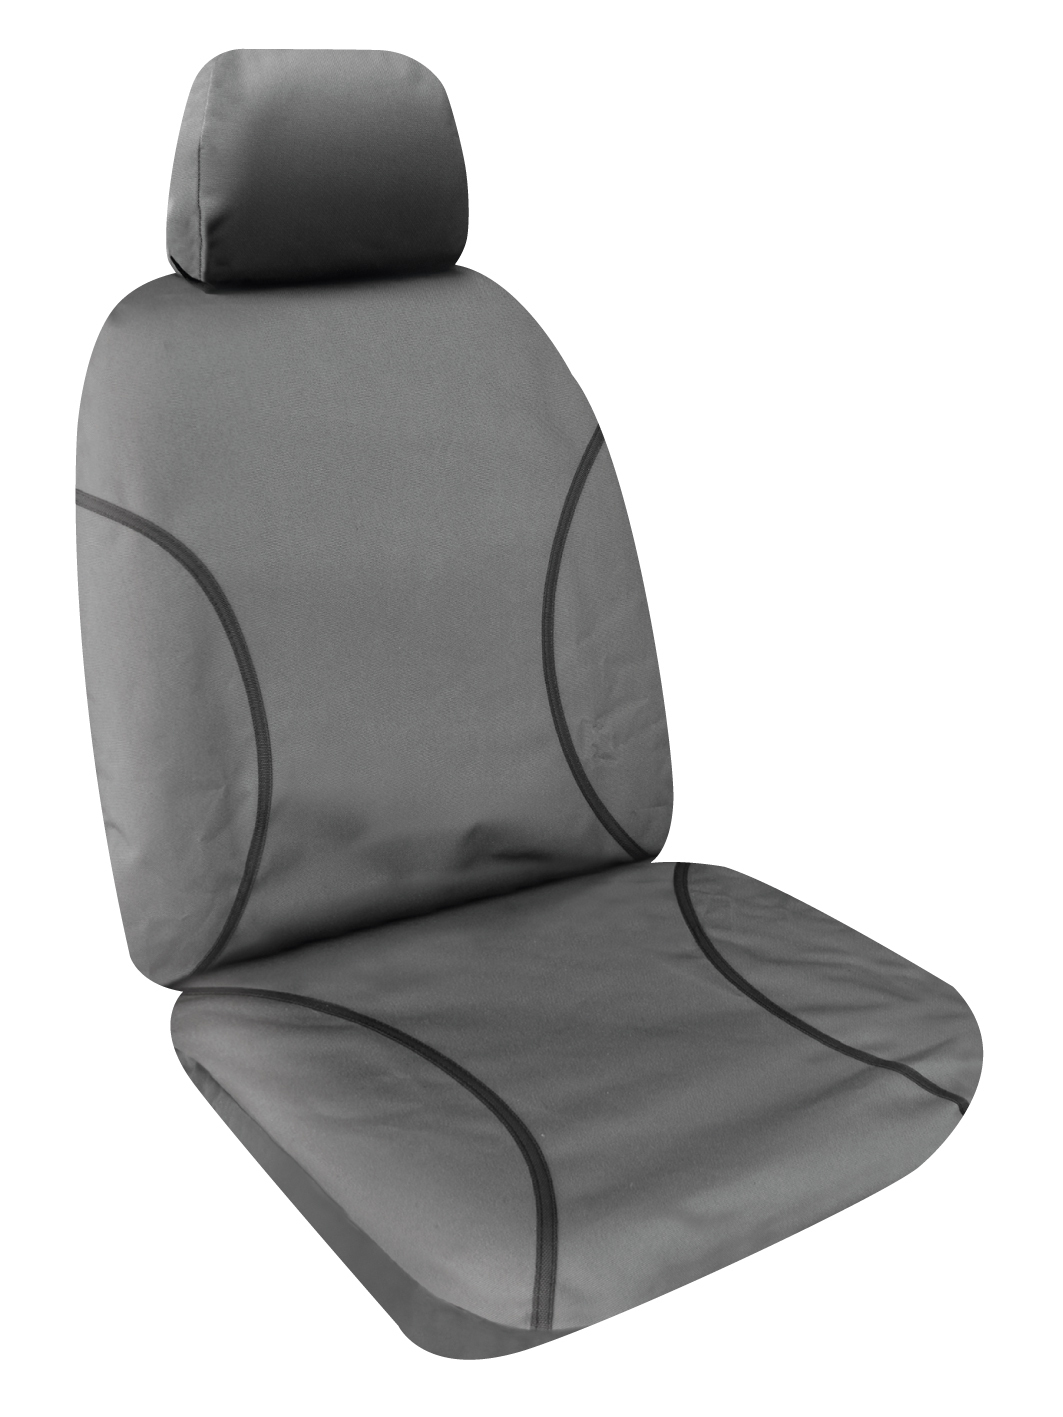 Sperling Seat Cover REAR TRG (TRADIES CANVAS GREY) To Suit Isuzu DMax Dual Cab (2012-2013)